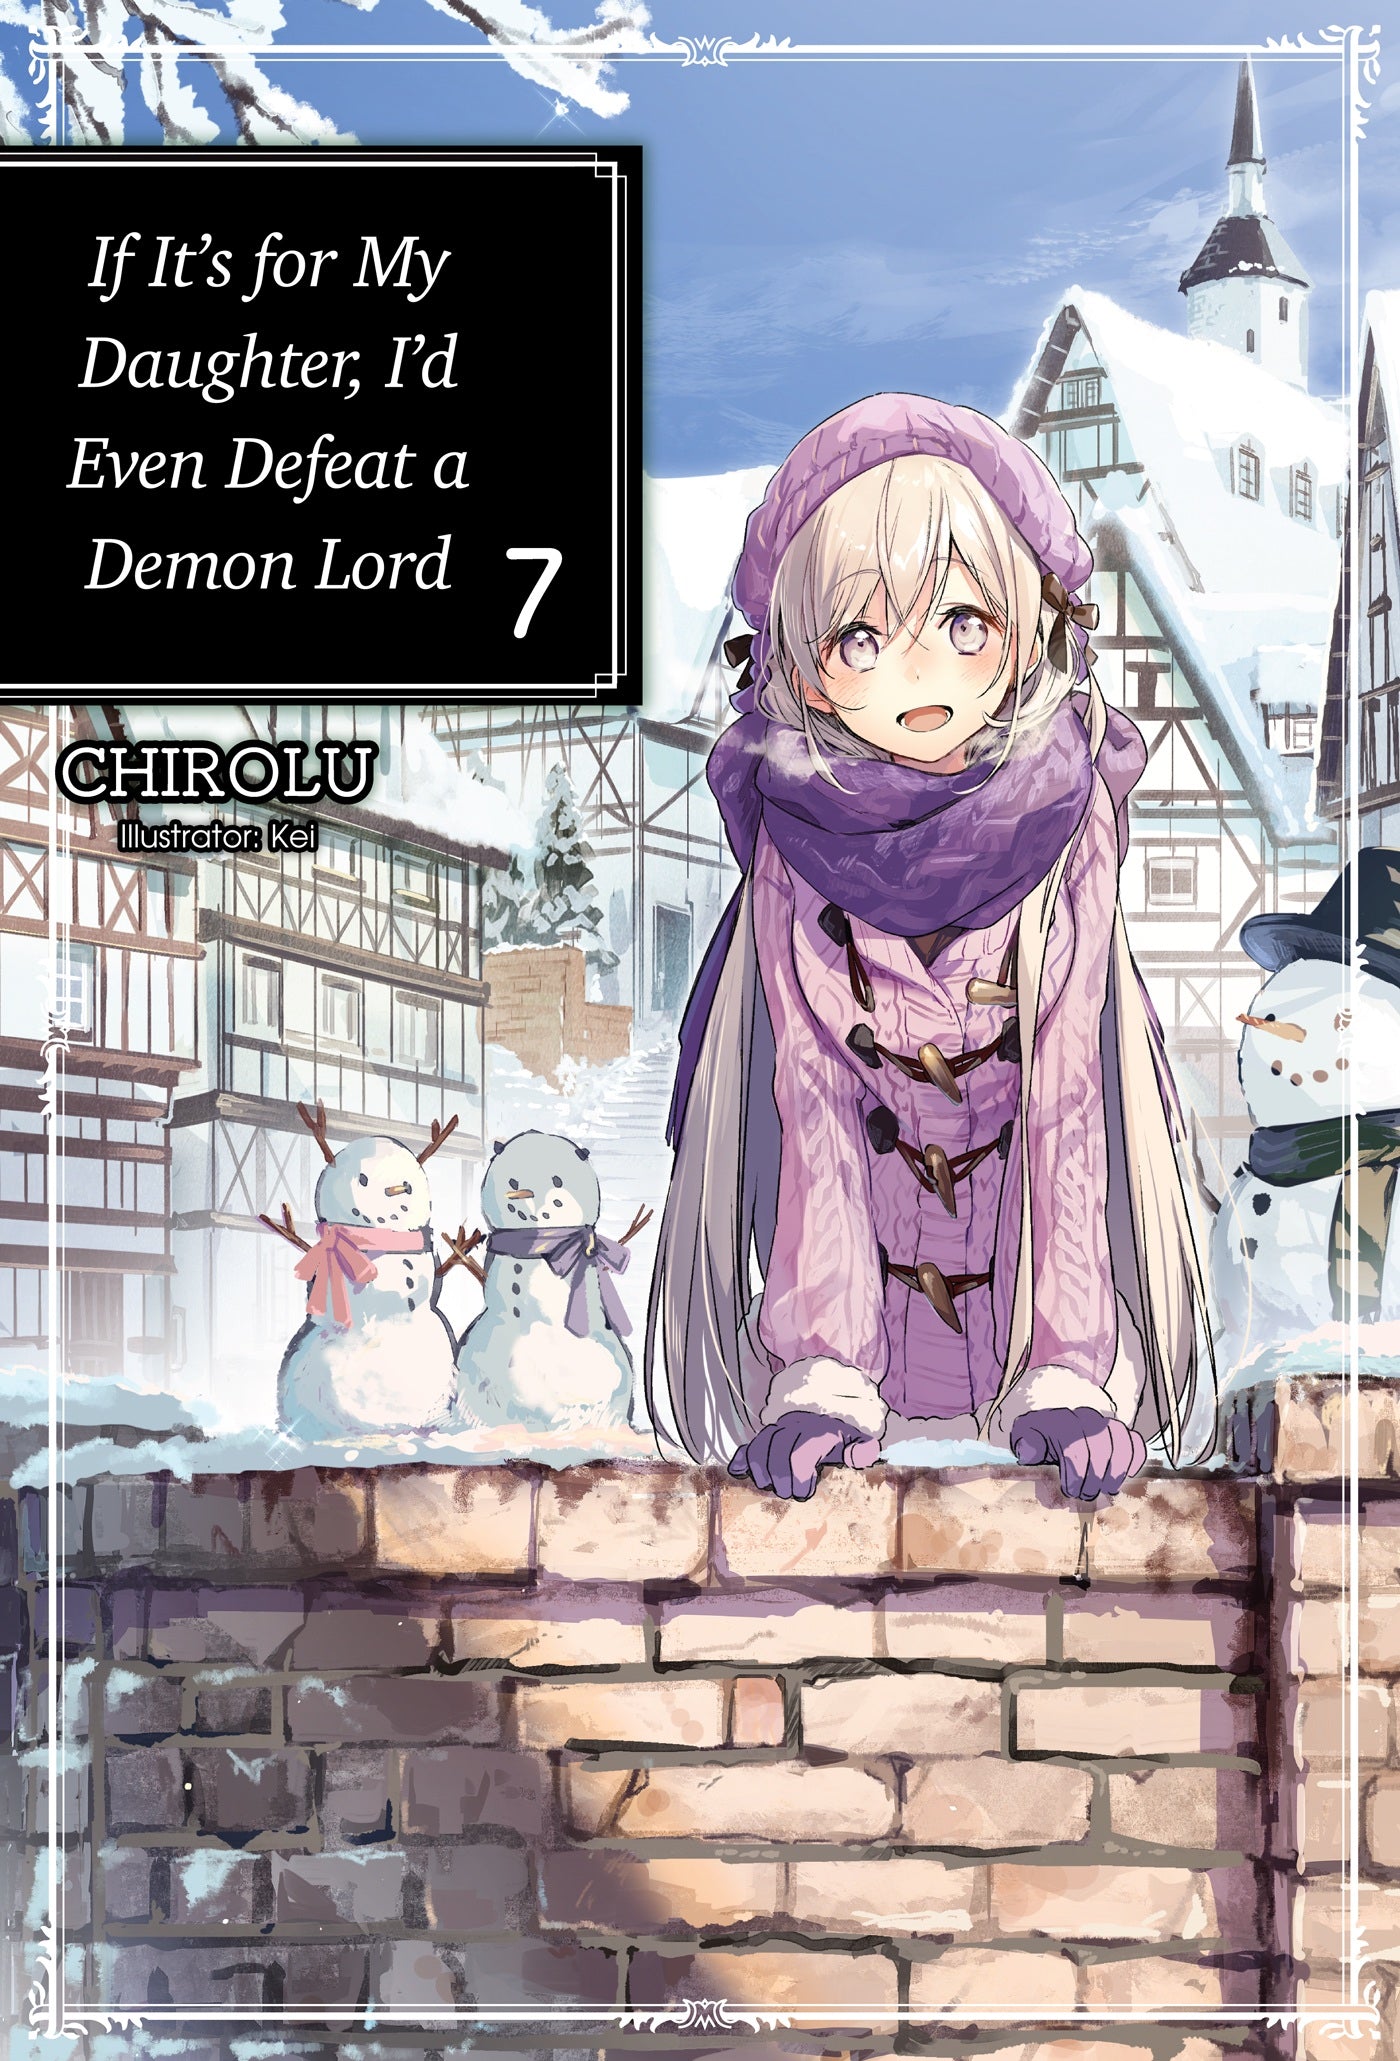 If It's for My Daughter, I'd Even Defeat a Demon Lord: Vol. 07 (Light Novel)